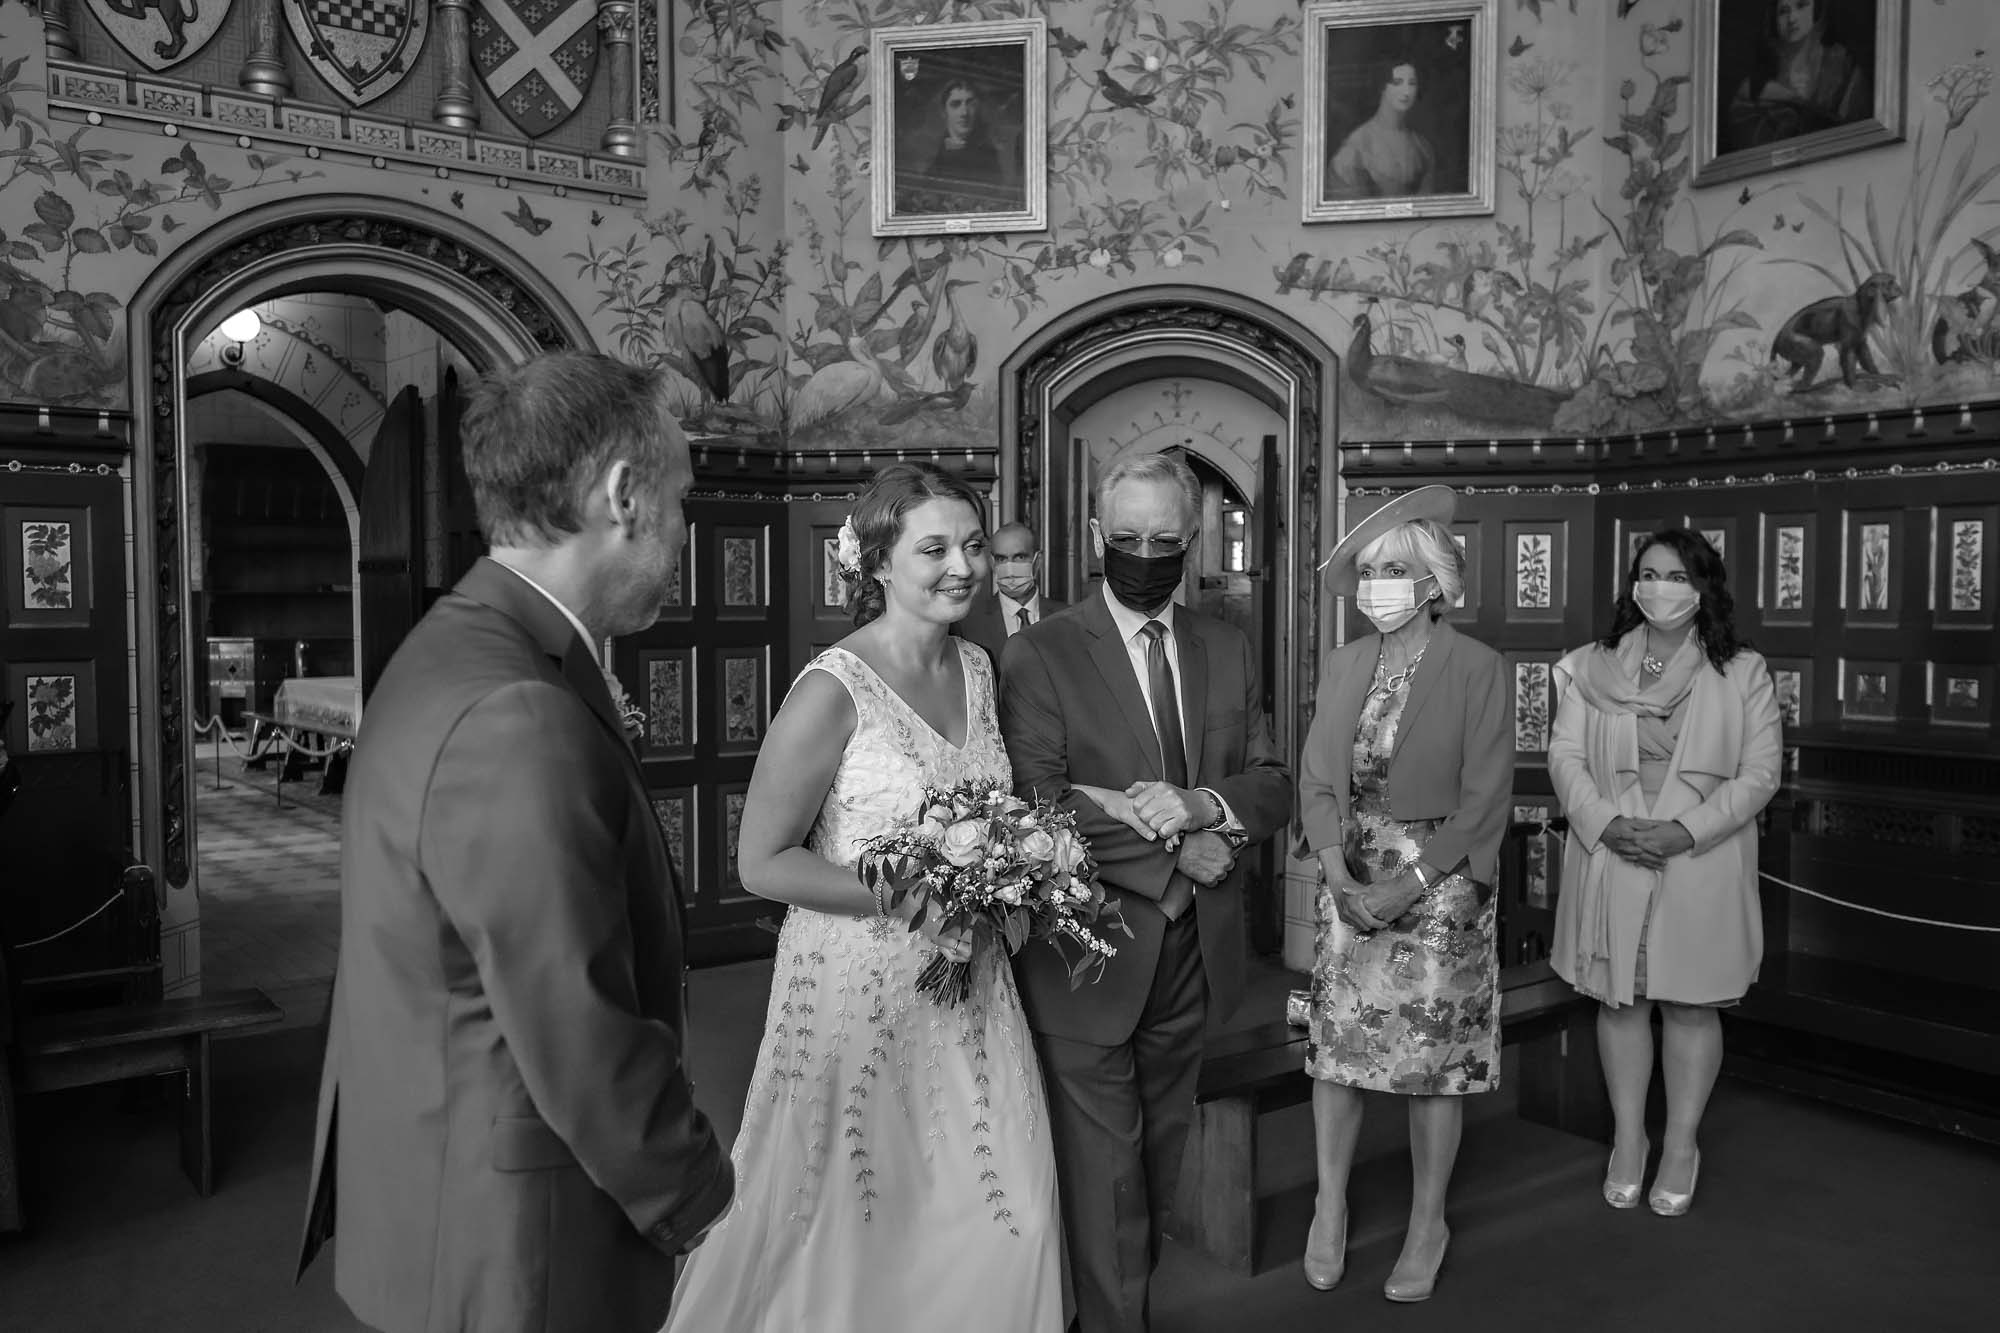 Masked guests watch the bride as she enters her wedding at Castell Coch